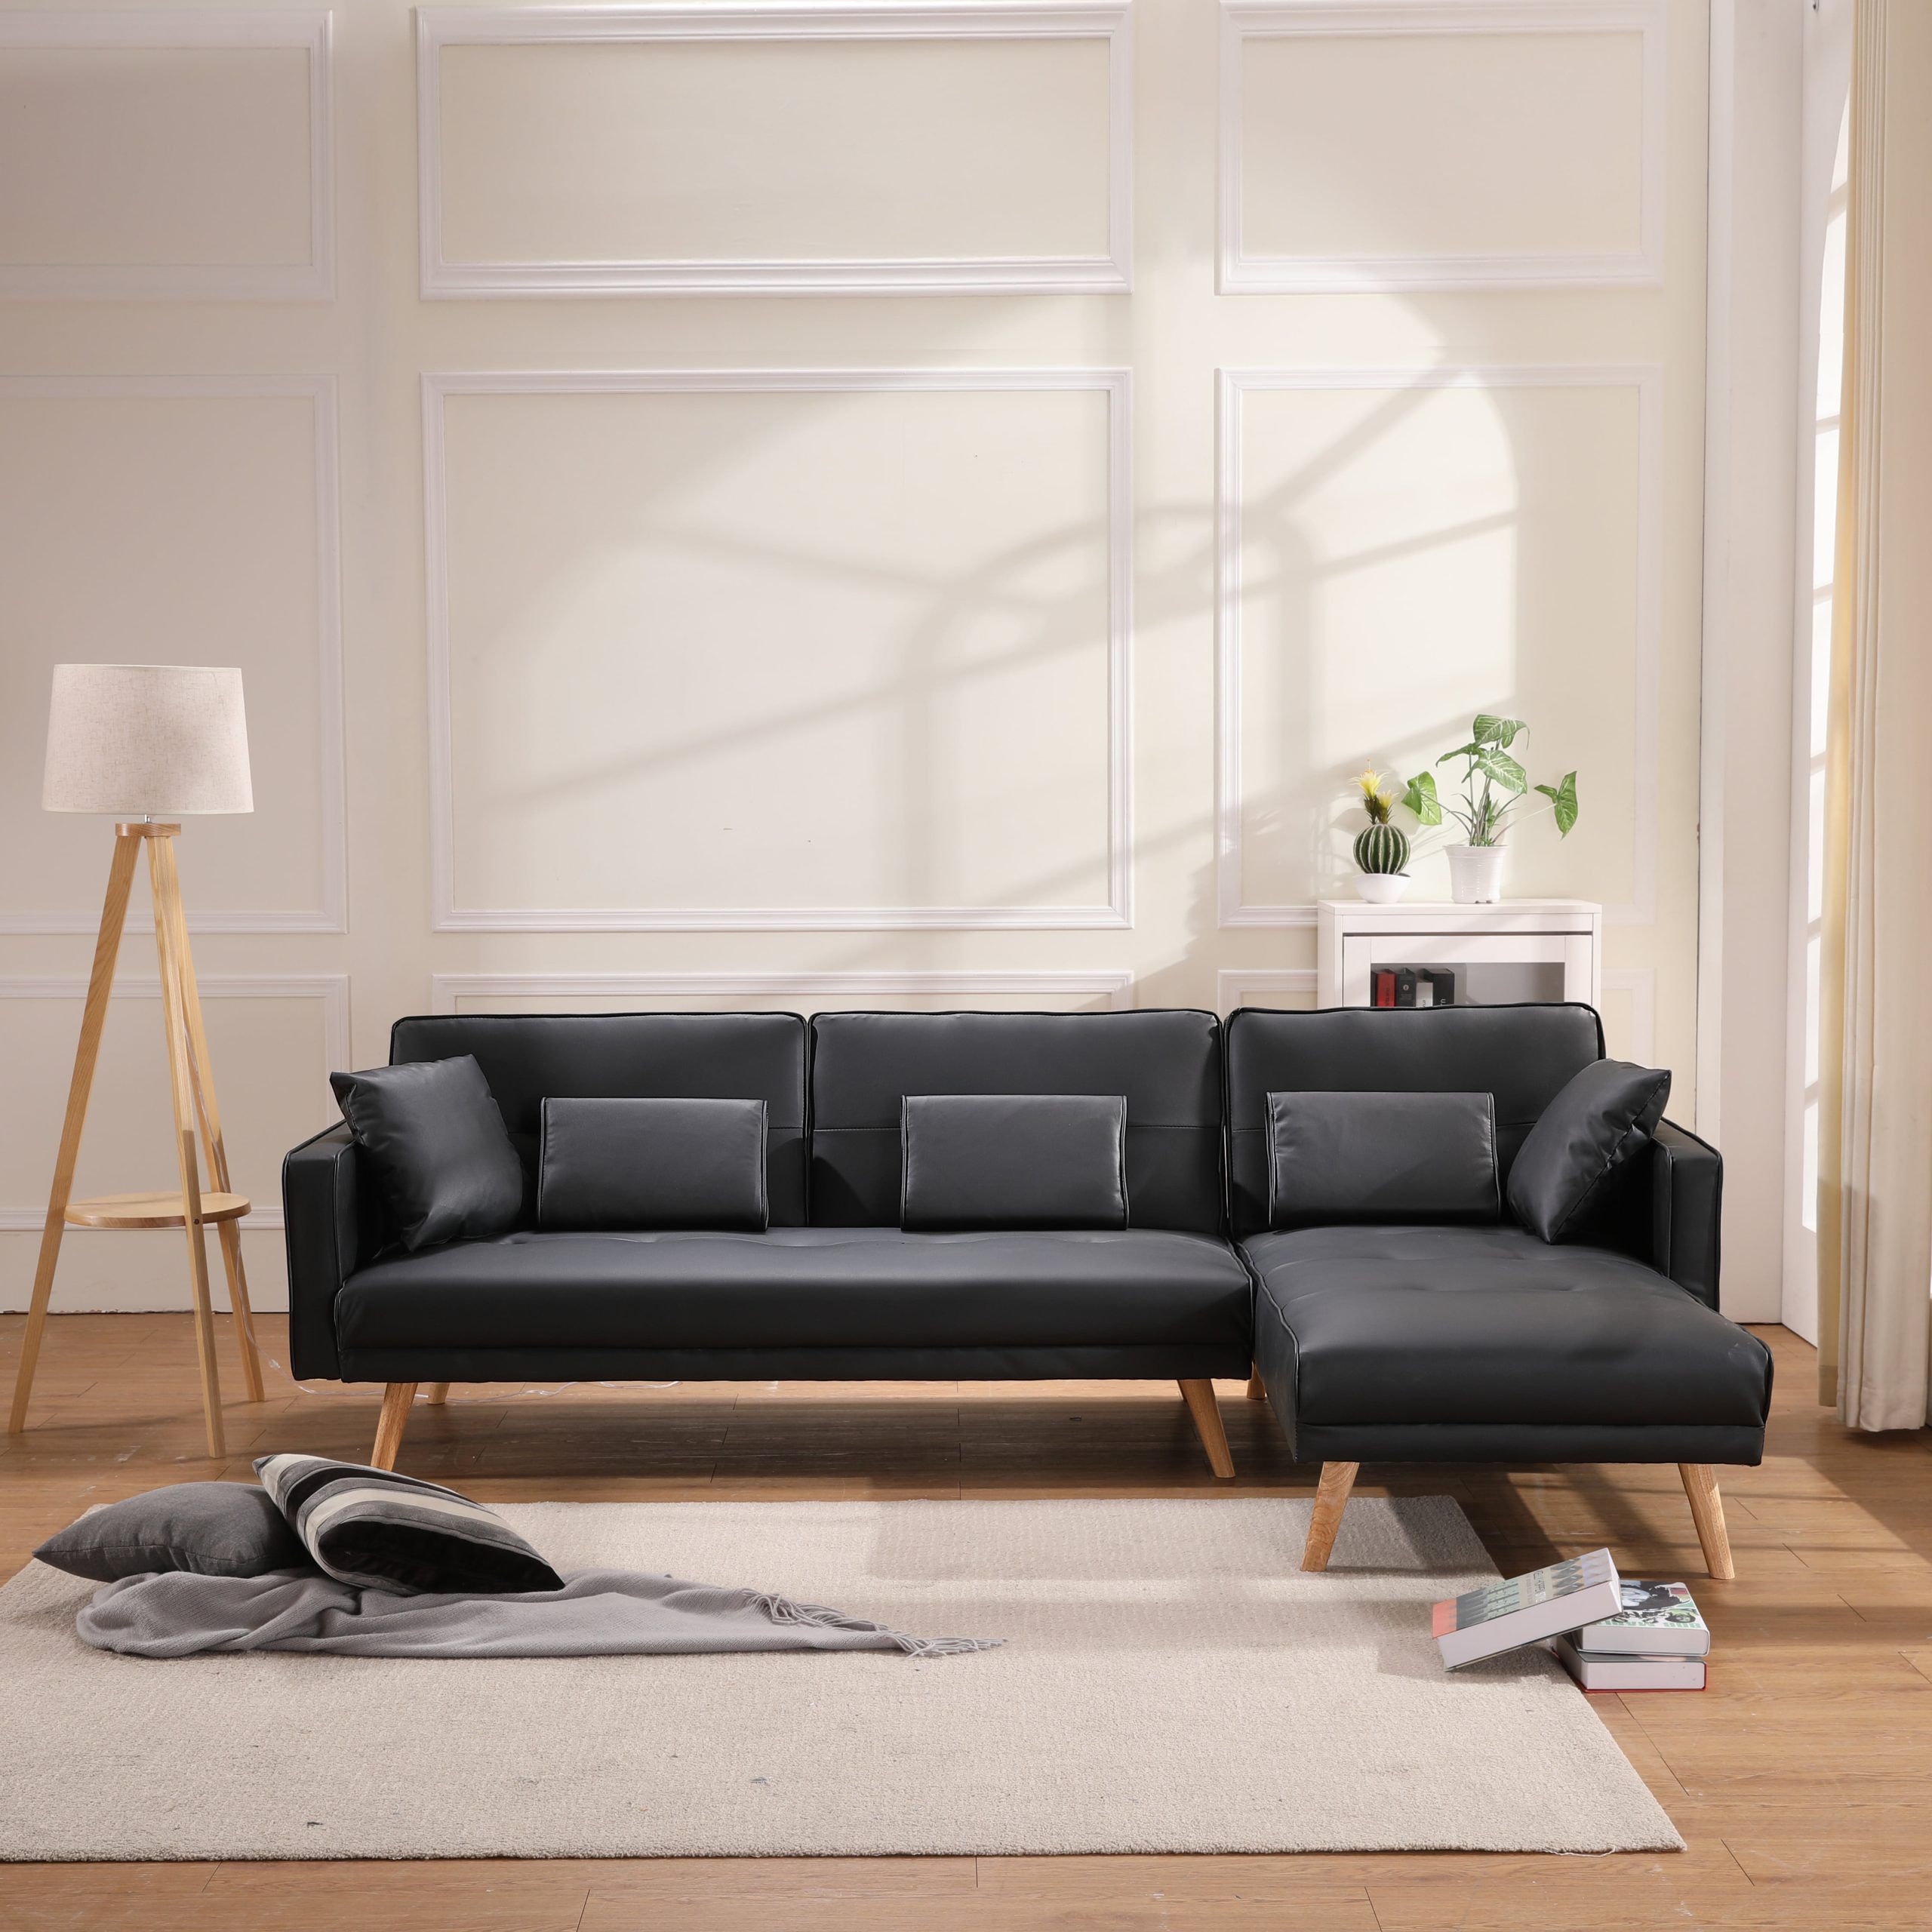 Sectional Sofa For Living Room, Modern Leather 3 Seat Sofa Bed, Futon Inside 3 Seat L Shaped Sofas In Black (View 15 of 20)